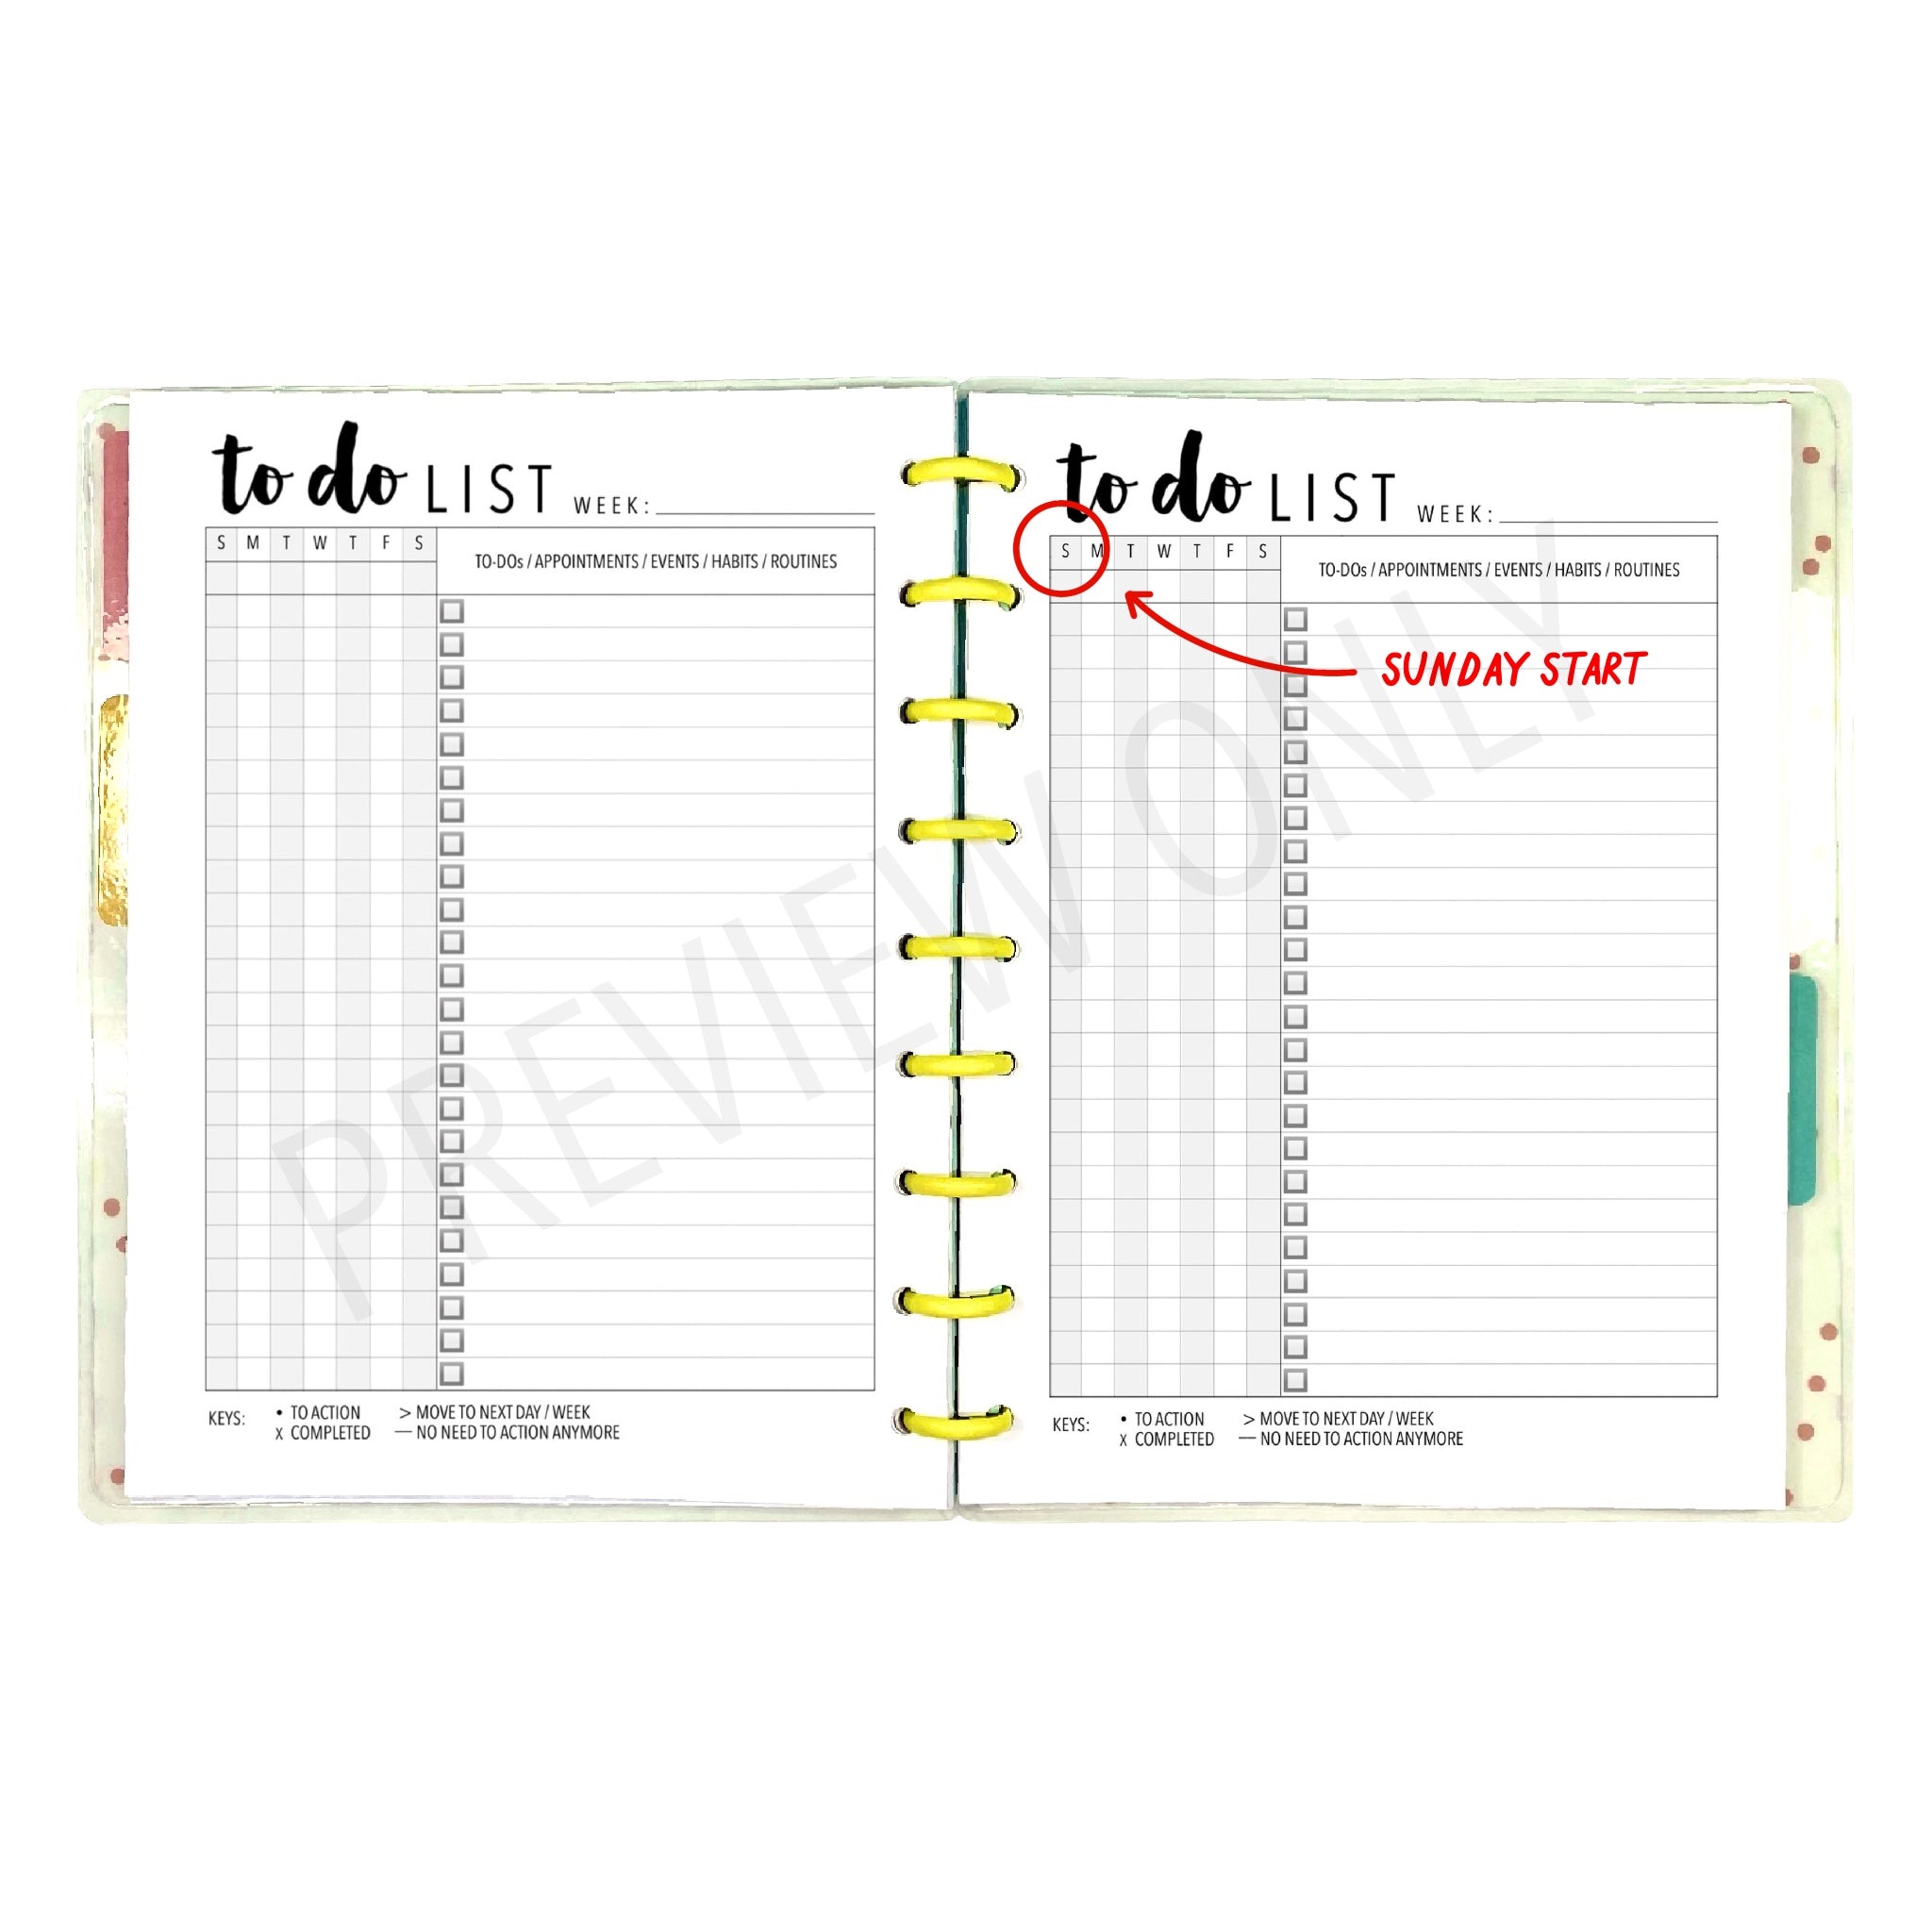 A5 Books Tracker Planner Inserts Printable Download - Letter / A4 / A5 –  MarianeCresp